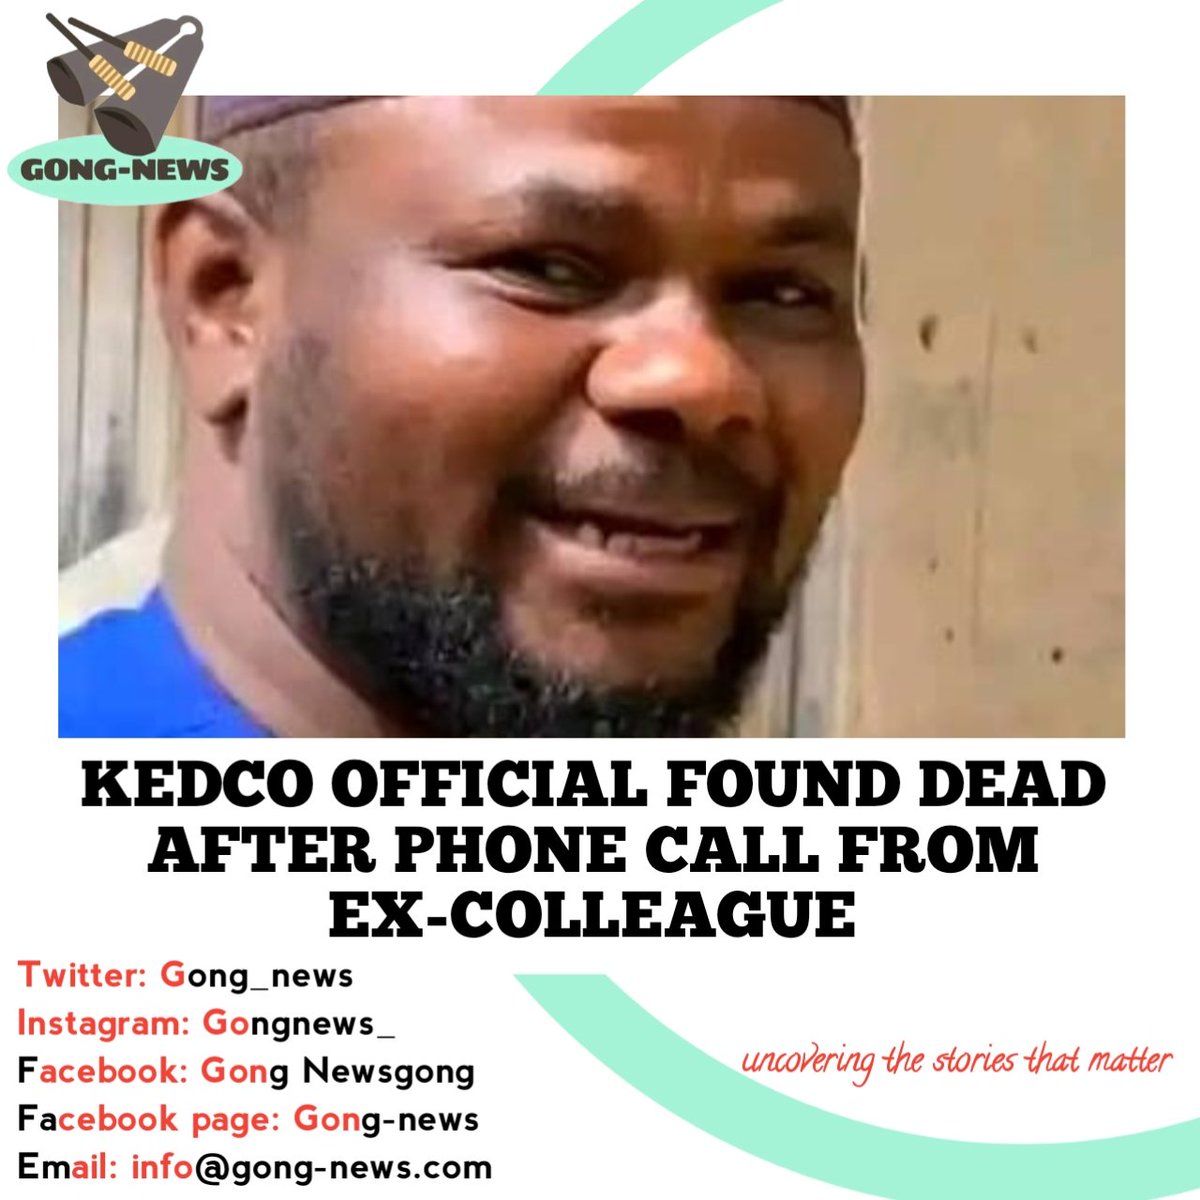 An employee of the Kano Electricity Distribution Company (KEDCO), Bello Bukar Adamu, has been found dead, days after he went missing from home.

#Gong Newsgong #Gong-news #info@gong-news.com #trending #NewsUpdate  #newspaper #LatestNews  #LatestUpdates #NewsInNigeria